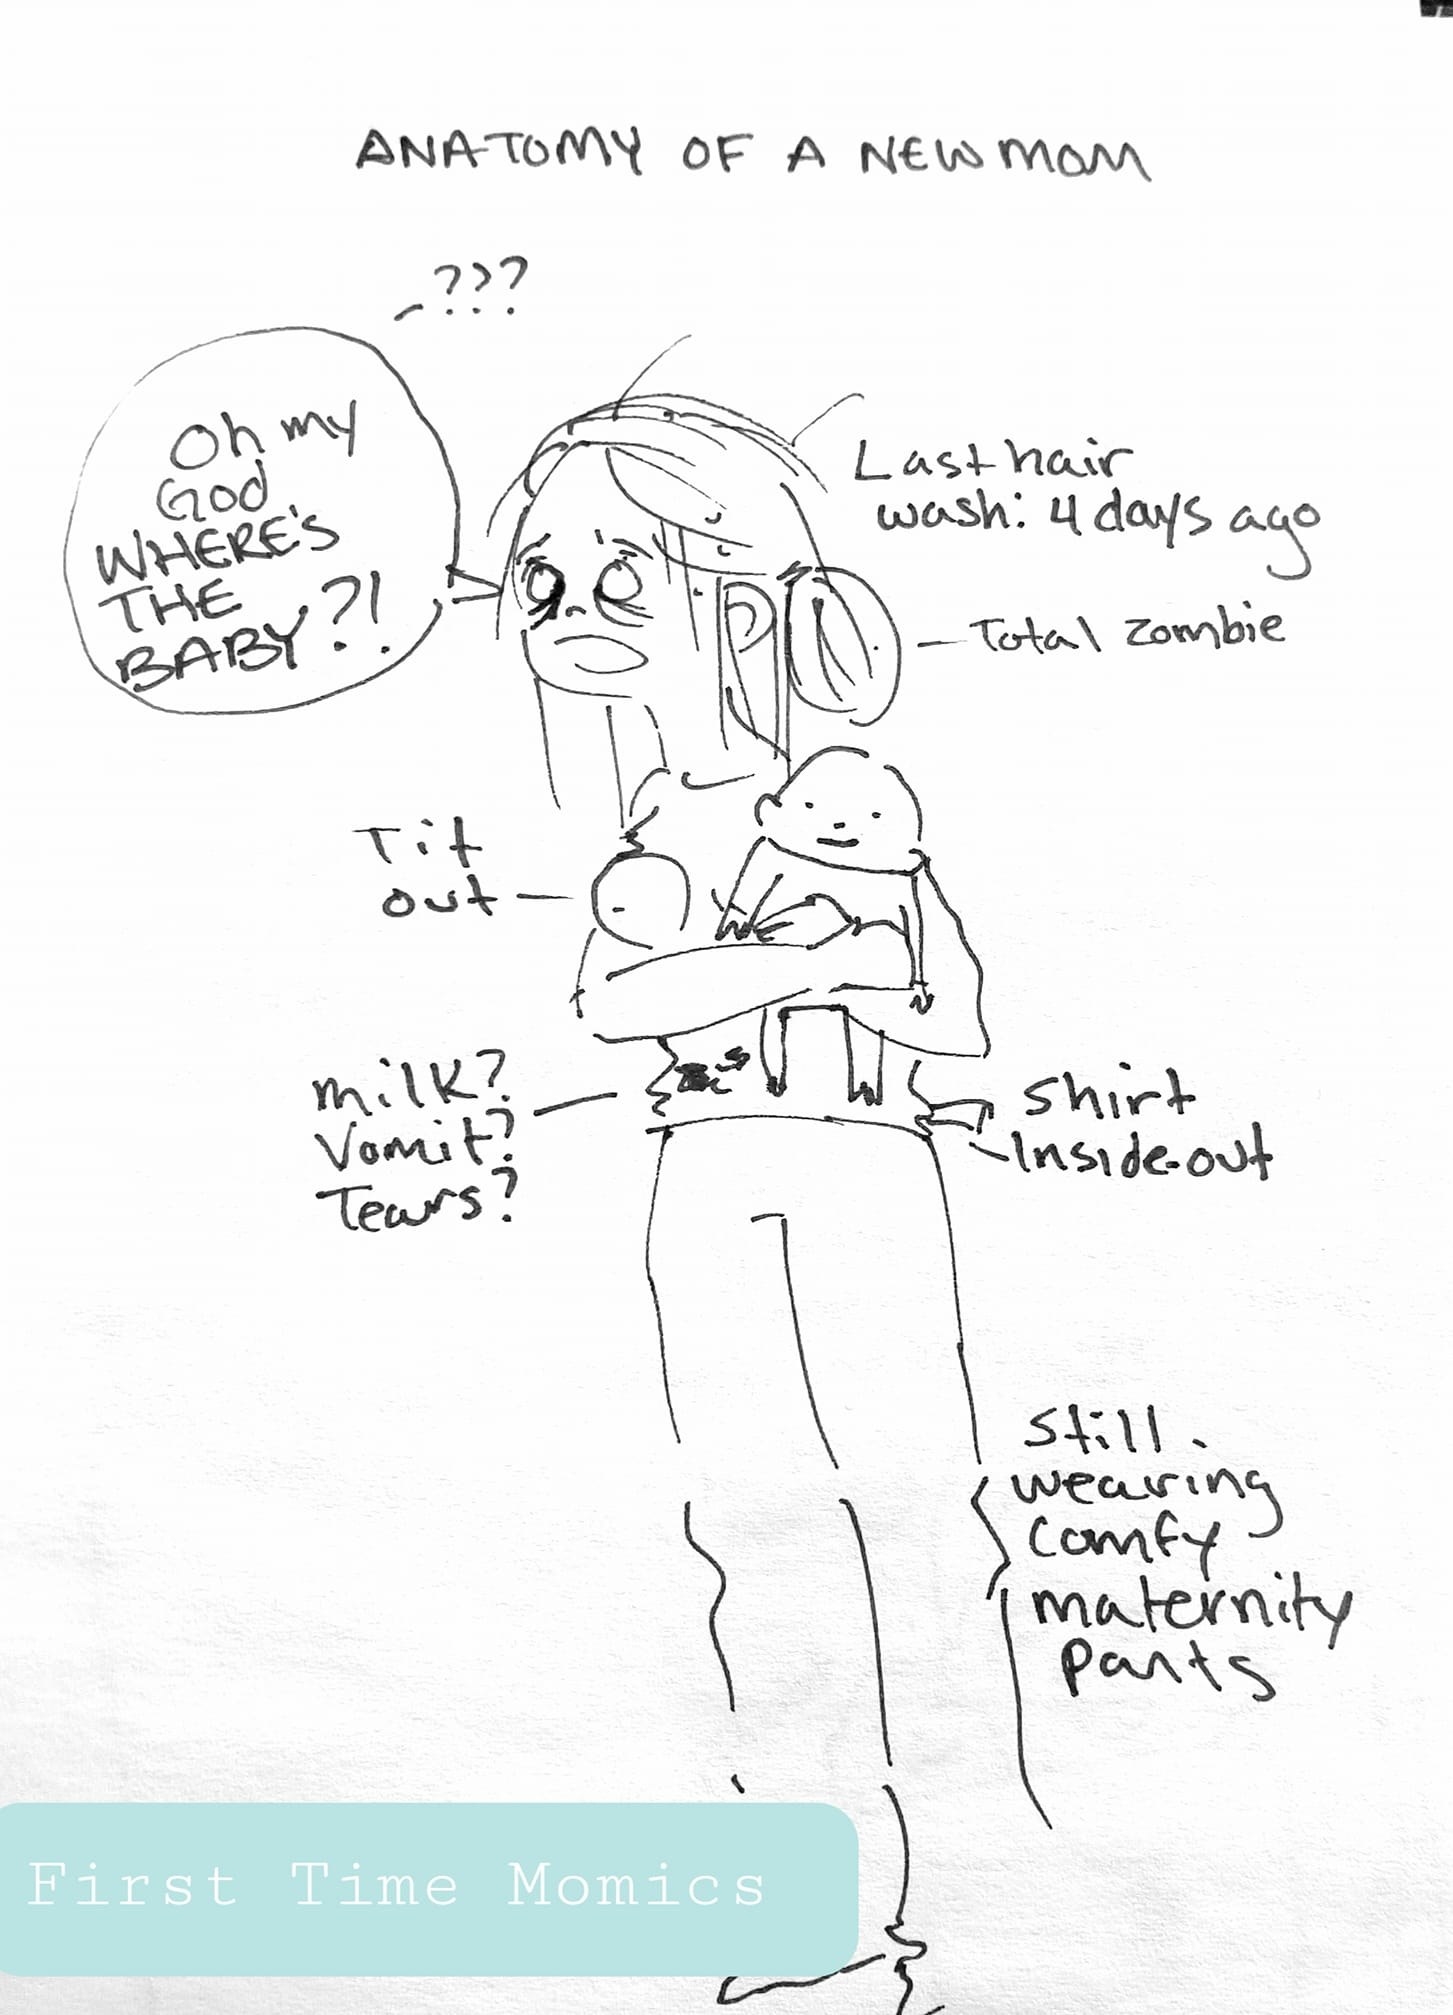 drawing of a woman wearing a t-shirt and jeans, holding a baby.